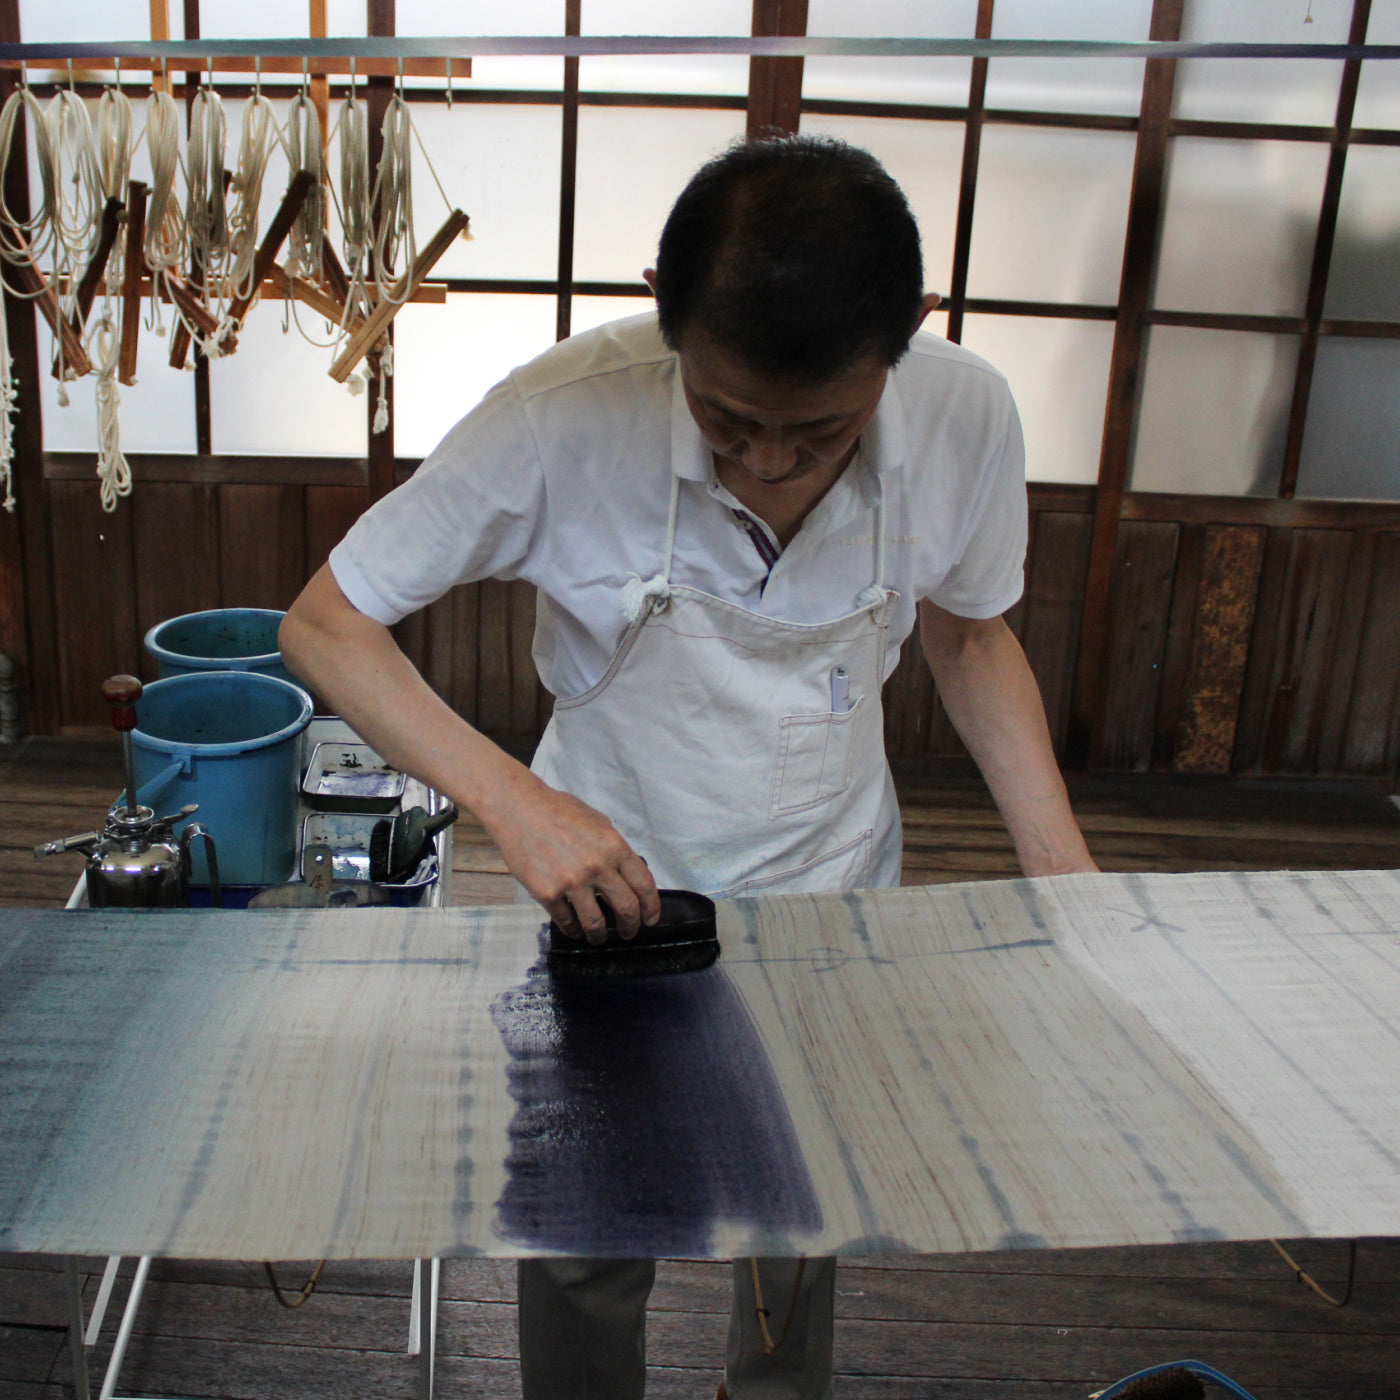 “Hikizome” or brush dyeing is a method of using a brush to dye textiles evenly or blurred without soaking in a dye solution. Whenever we visit craftman, we are always impressed by their traditional skills and wonderful work.